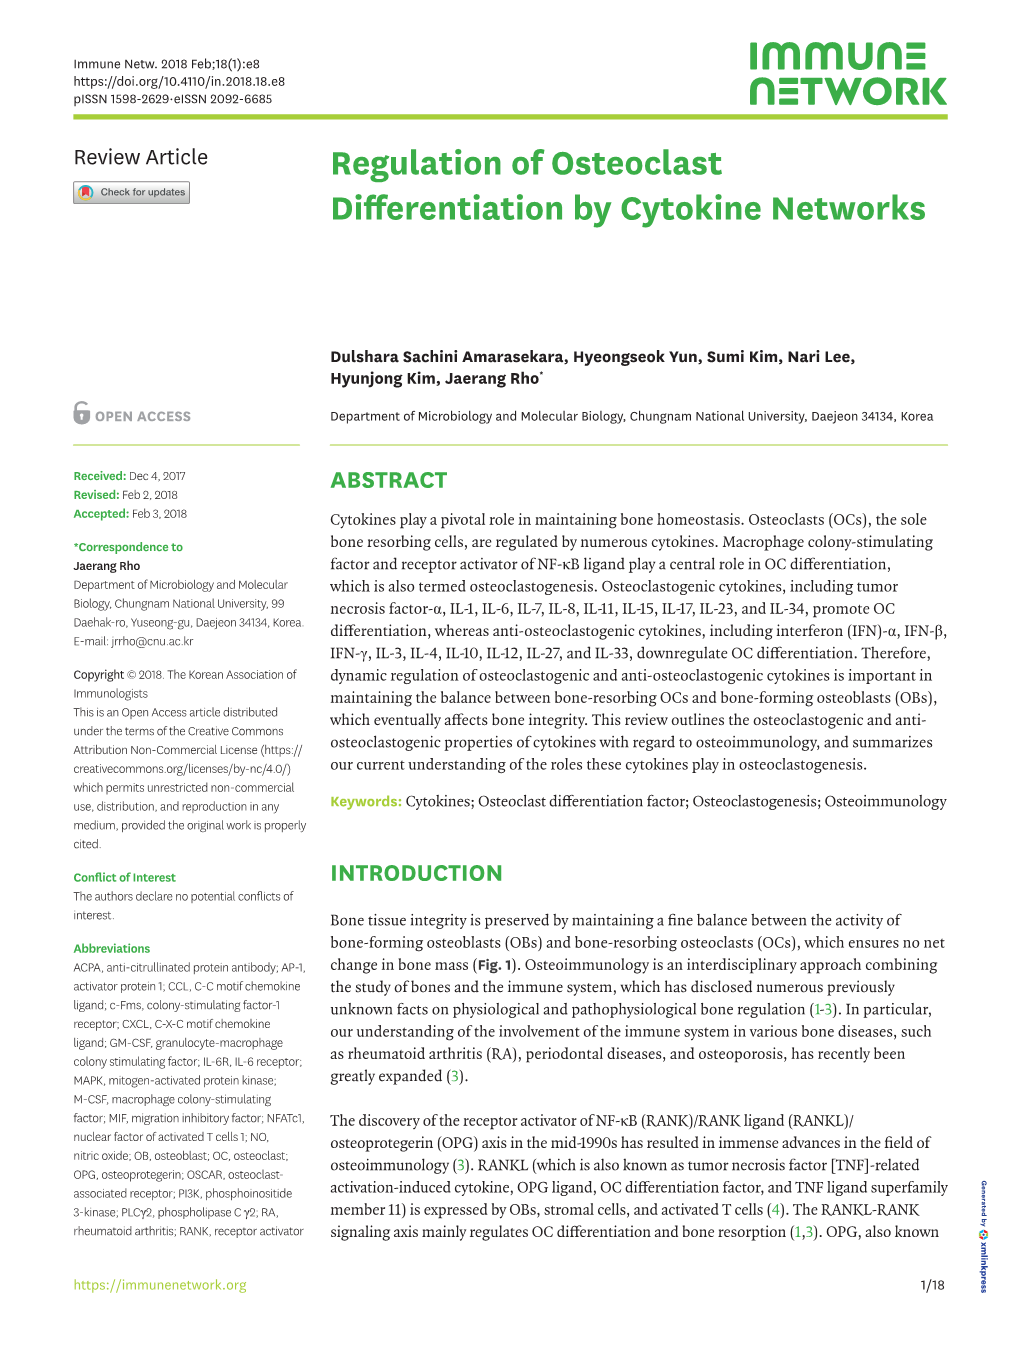 Regulation of Osteoclast Differentiation by Cytokine Networks